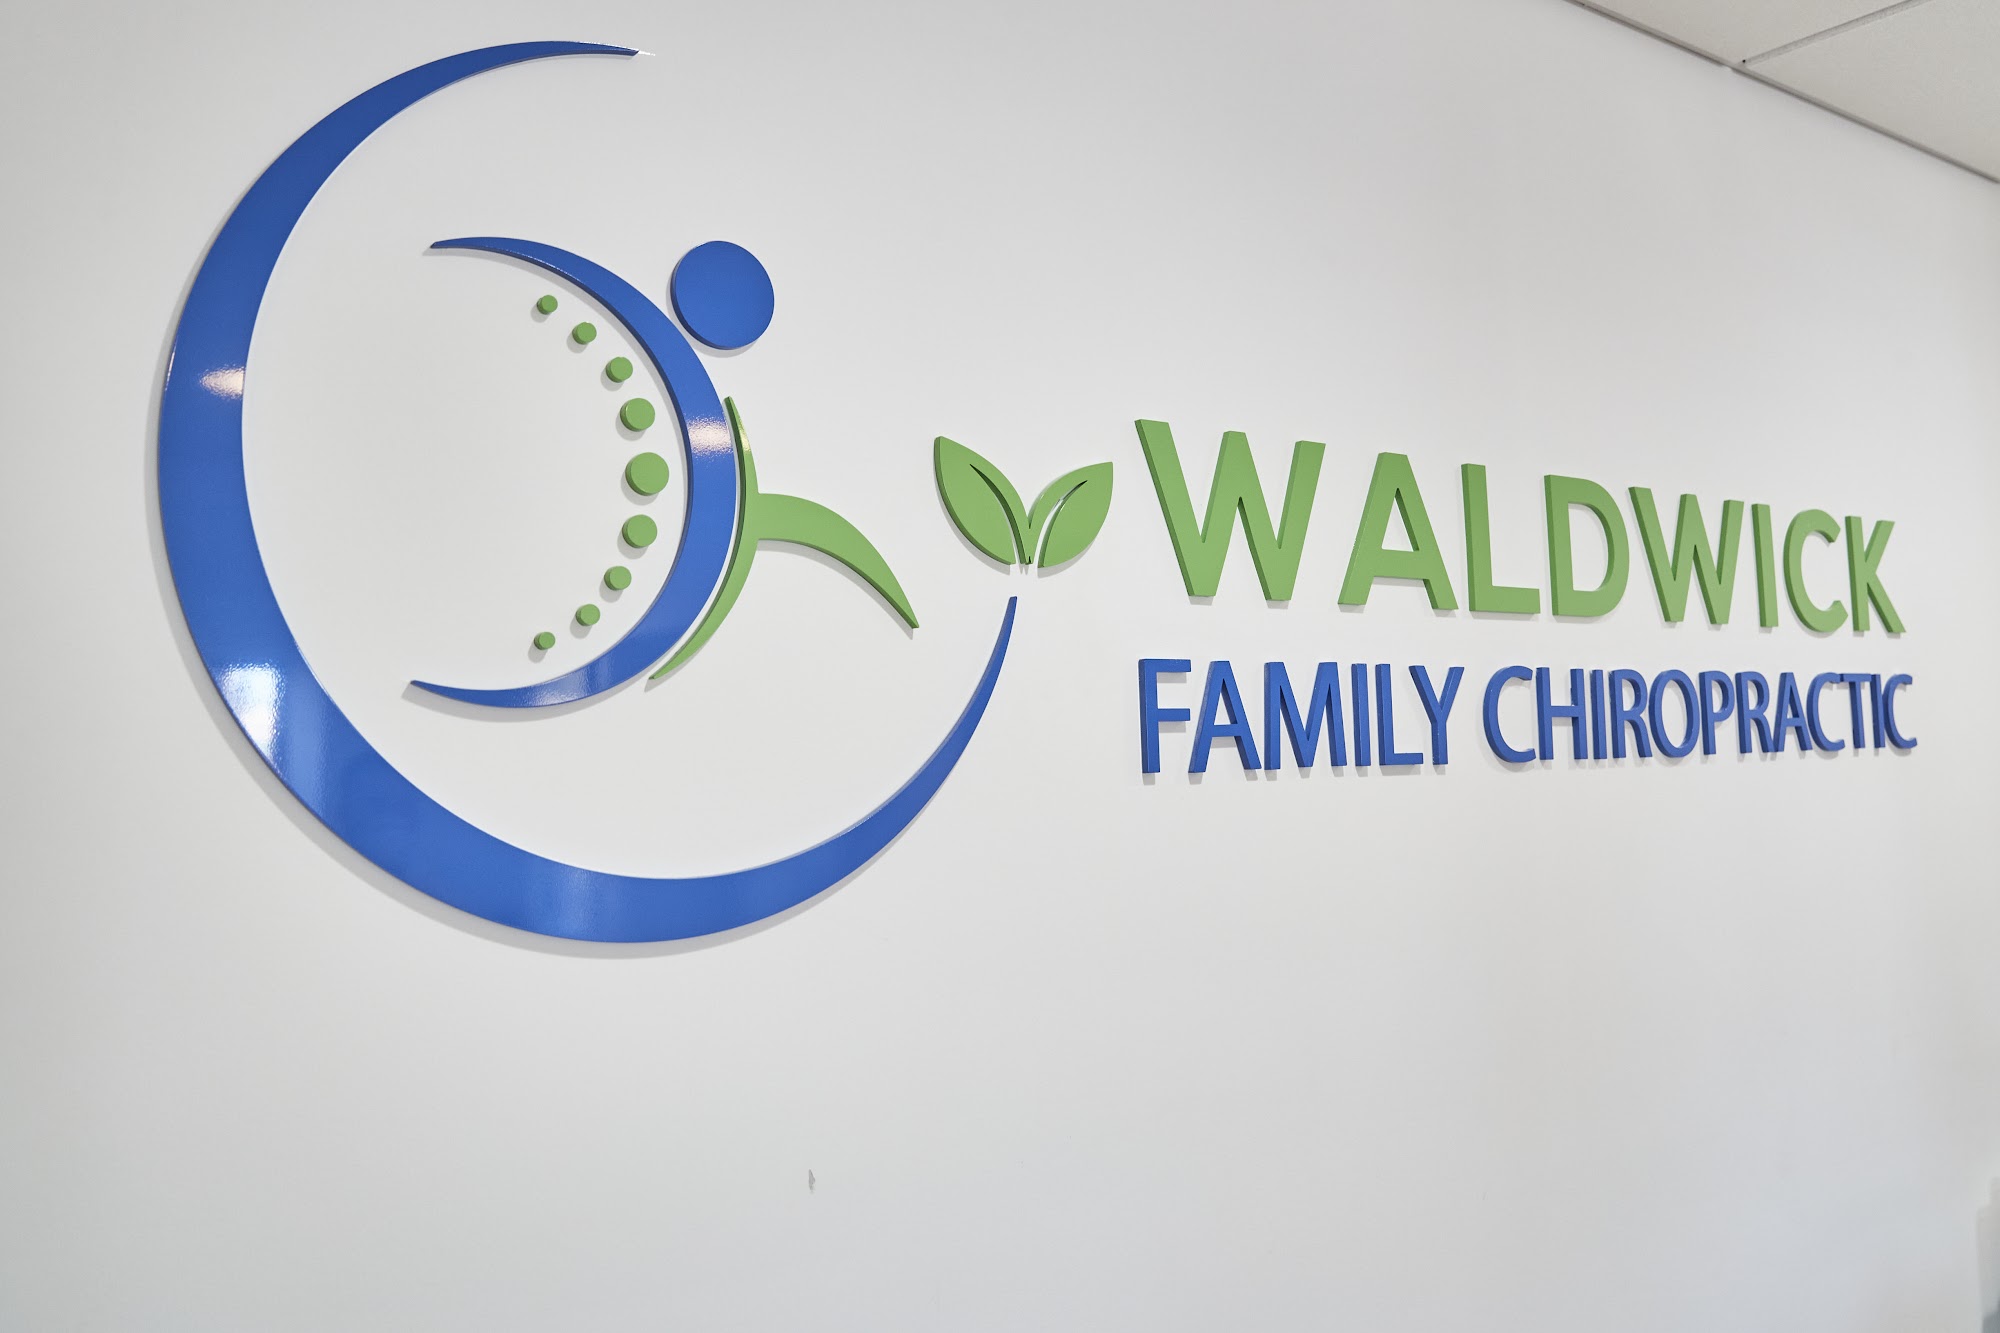 Waldwick Family Chiropractic 22 Wyckoff Ave Suite 1, Waldwick New Jersey 07463